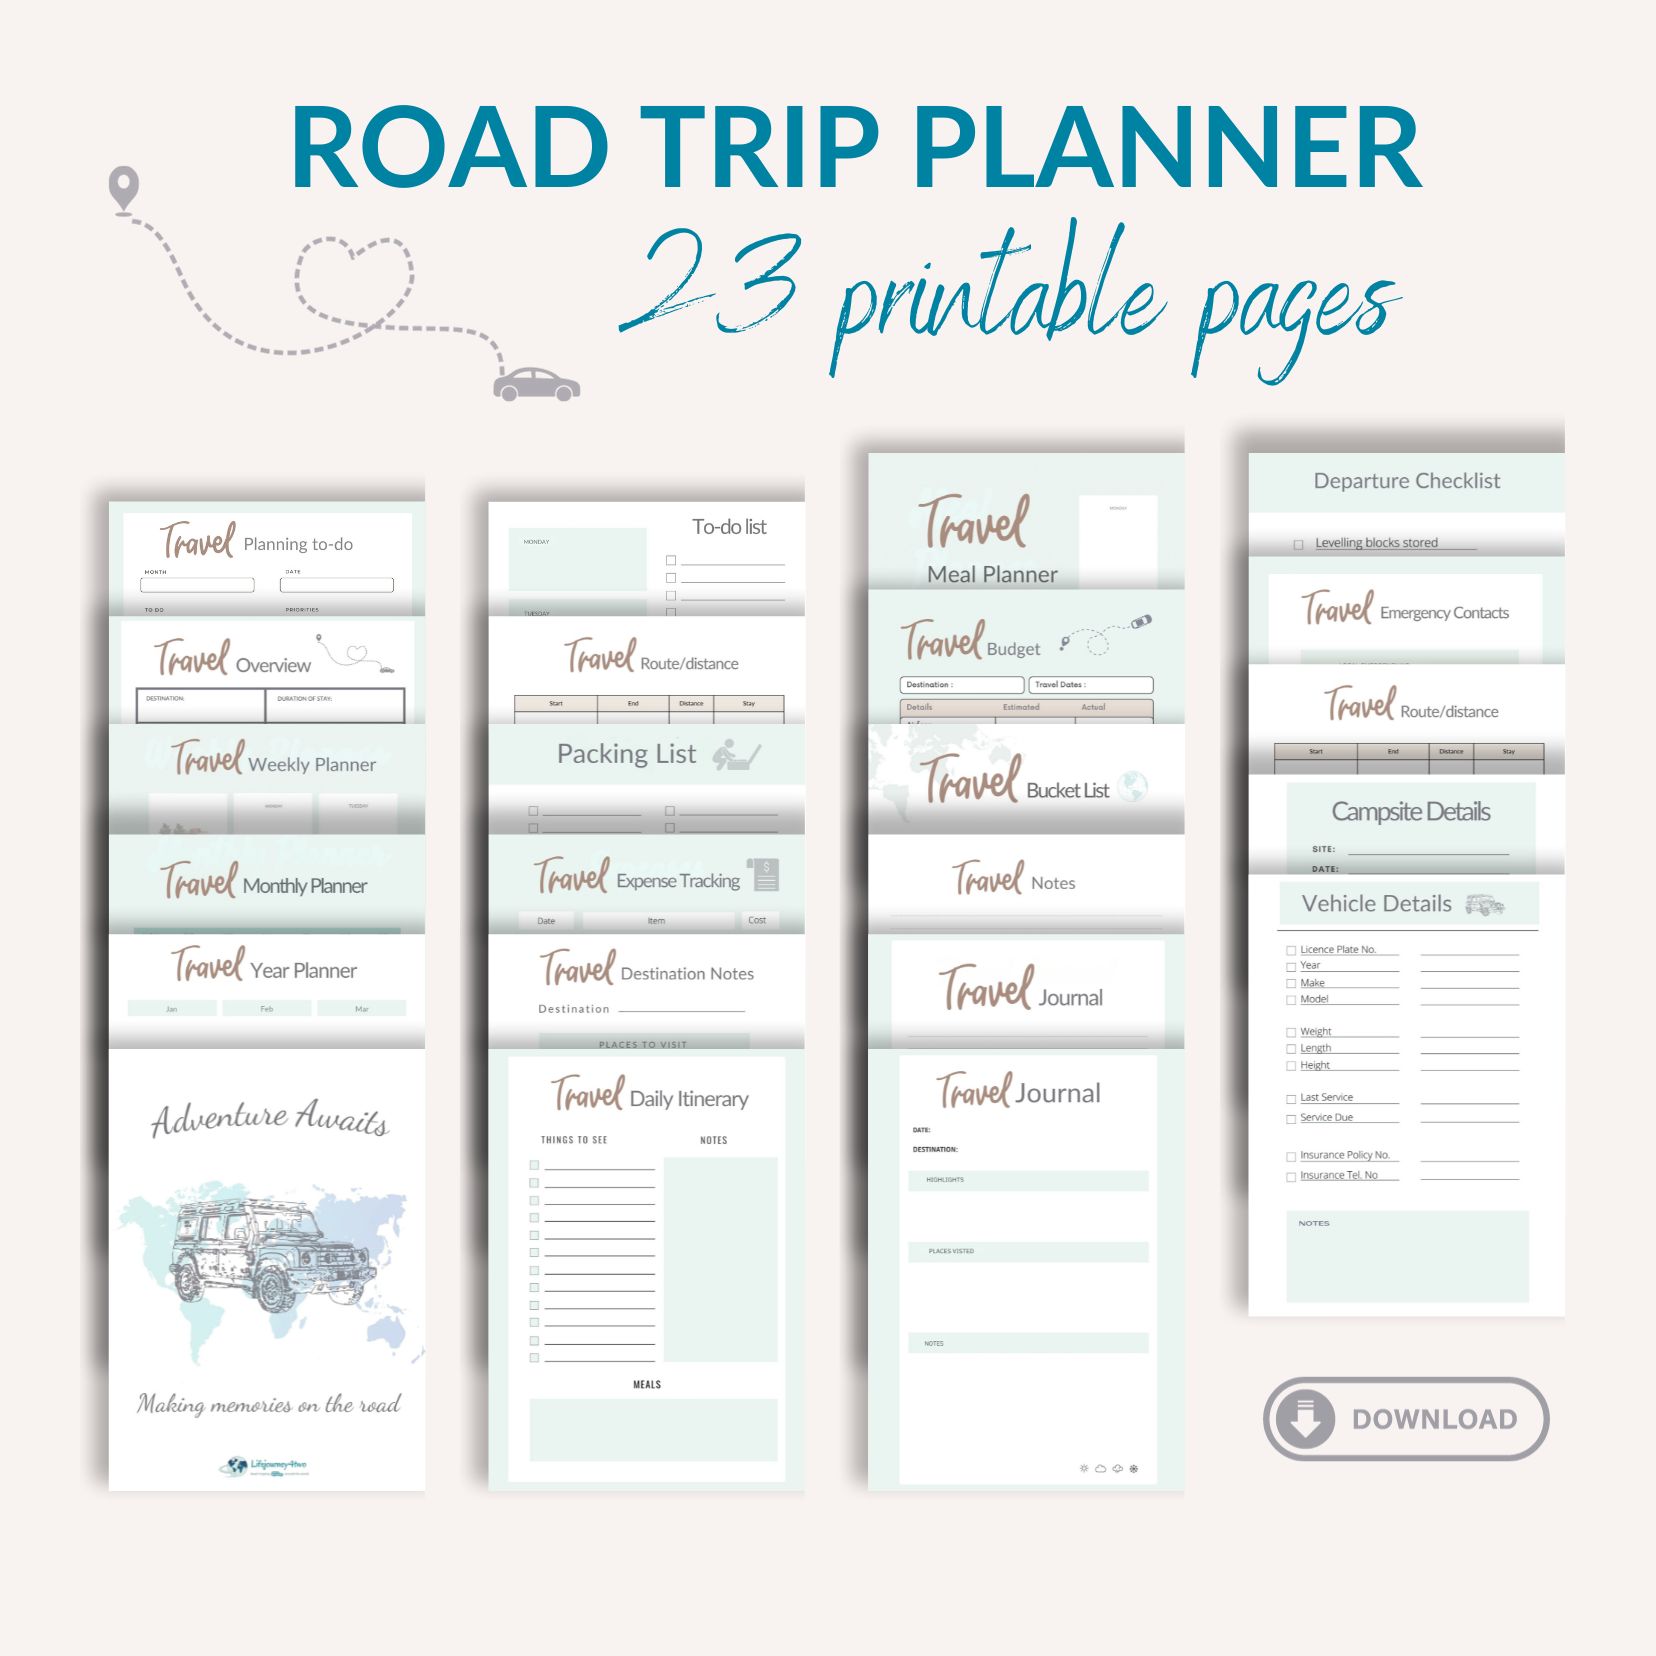 Road trip planner with bush 4 x4 on front cover